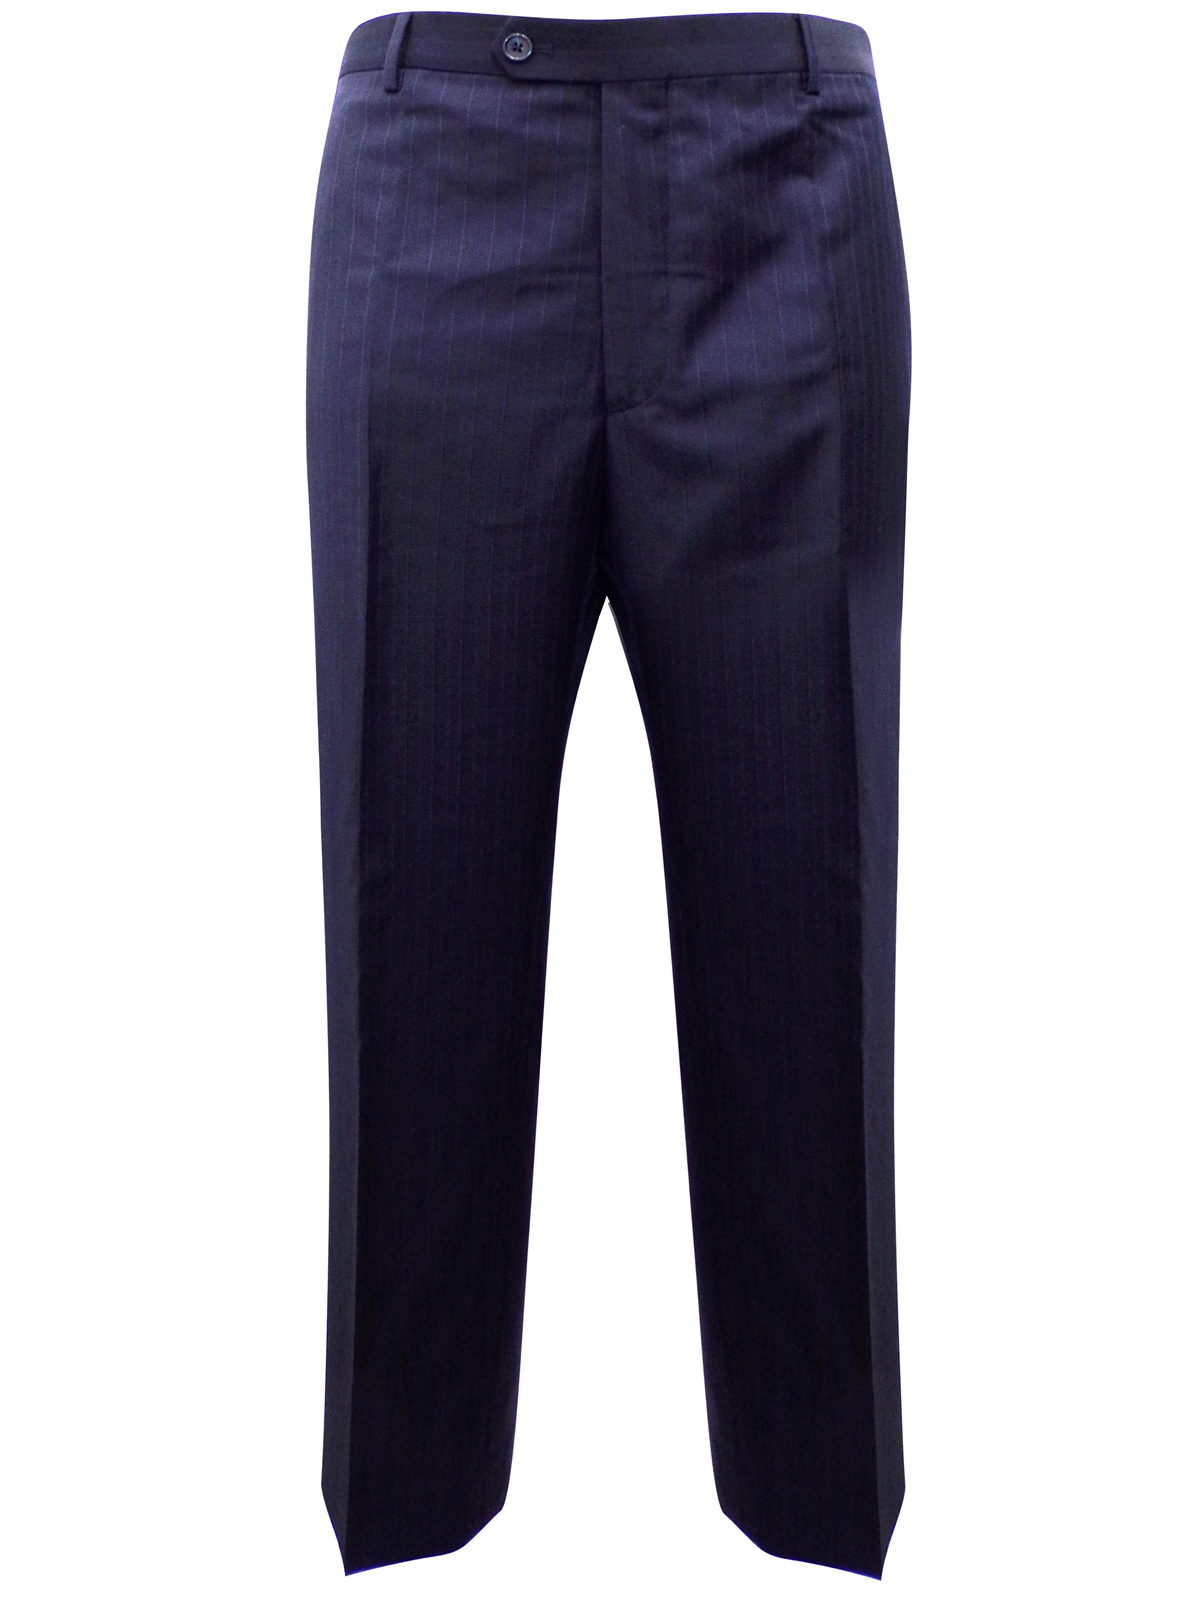 Marks and Spencer - - M&5 NAVY Pure Wool Flat Front Pinstripe Trousers ...